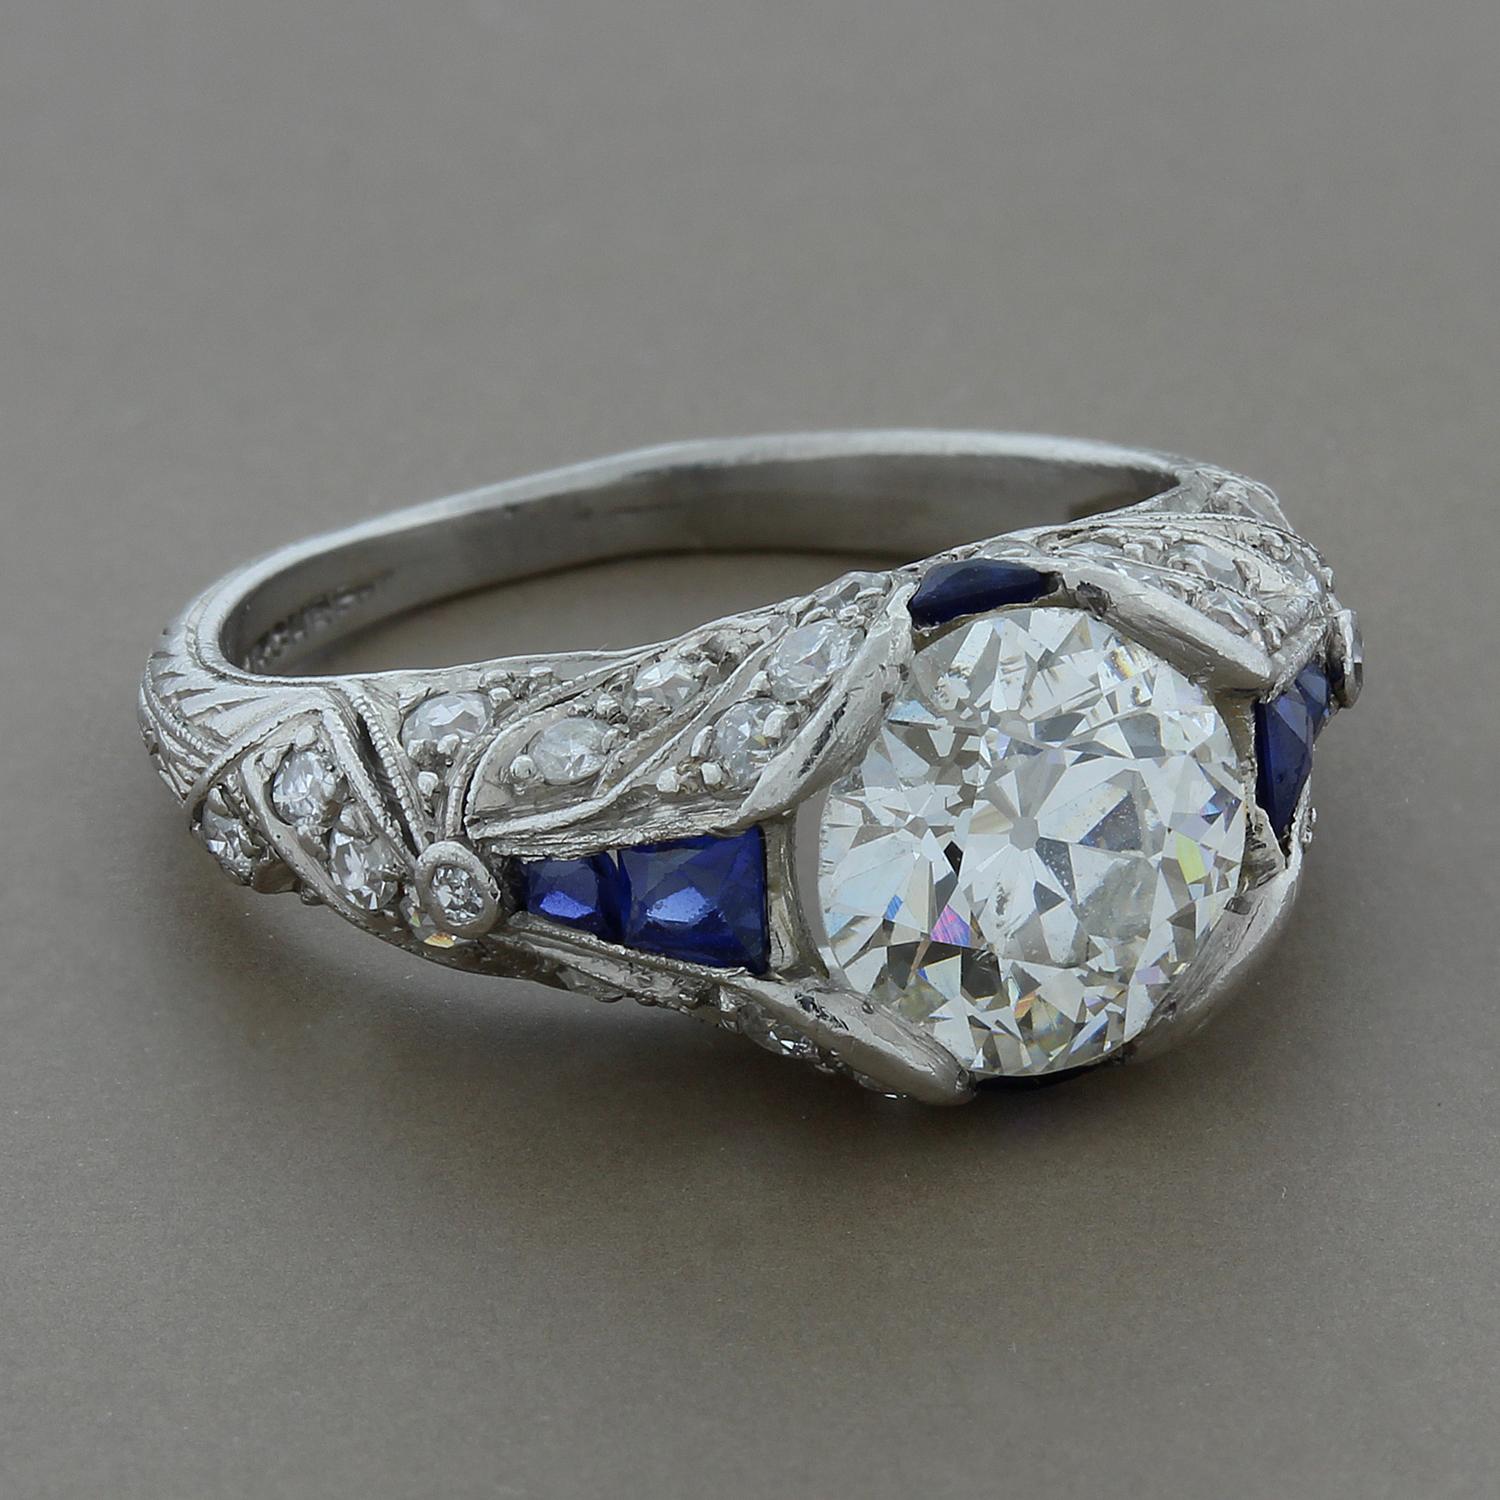 A spectacular art deco ring featuring a brilliant 2.20 carat round antique cut diamond at the center. The feminine platinum setting is complemented by 0.70 carats of diamonds and blue sapphires in a design reminiscent of the era. 

Currently ring